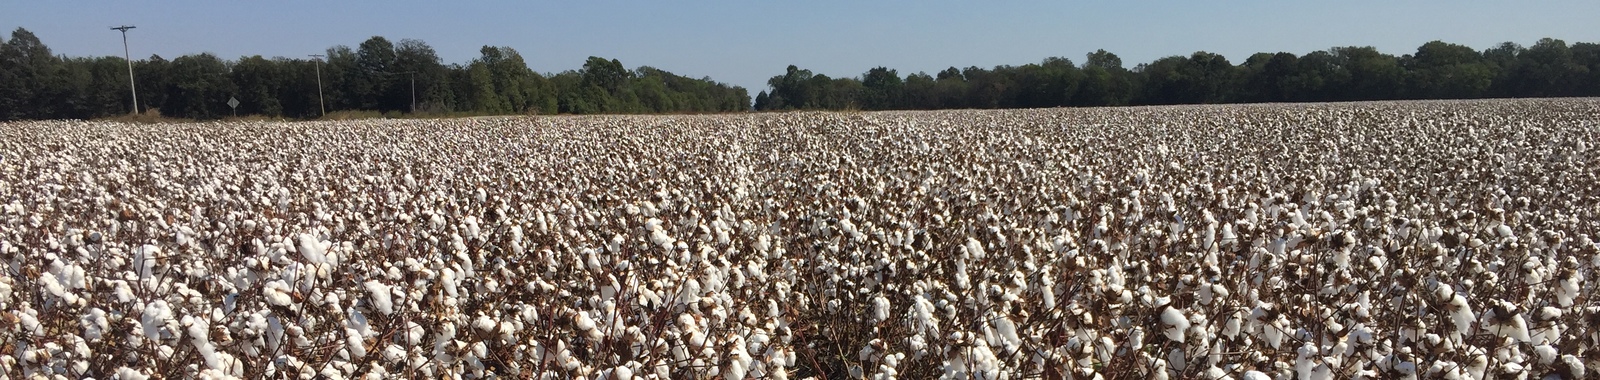 Market Requirements in Cotton